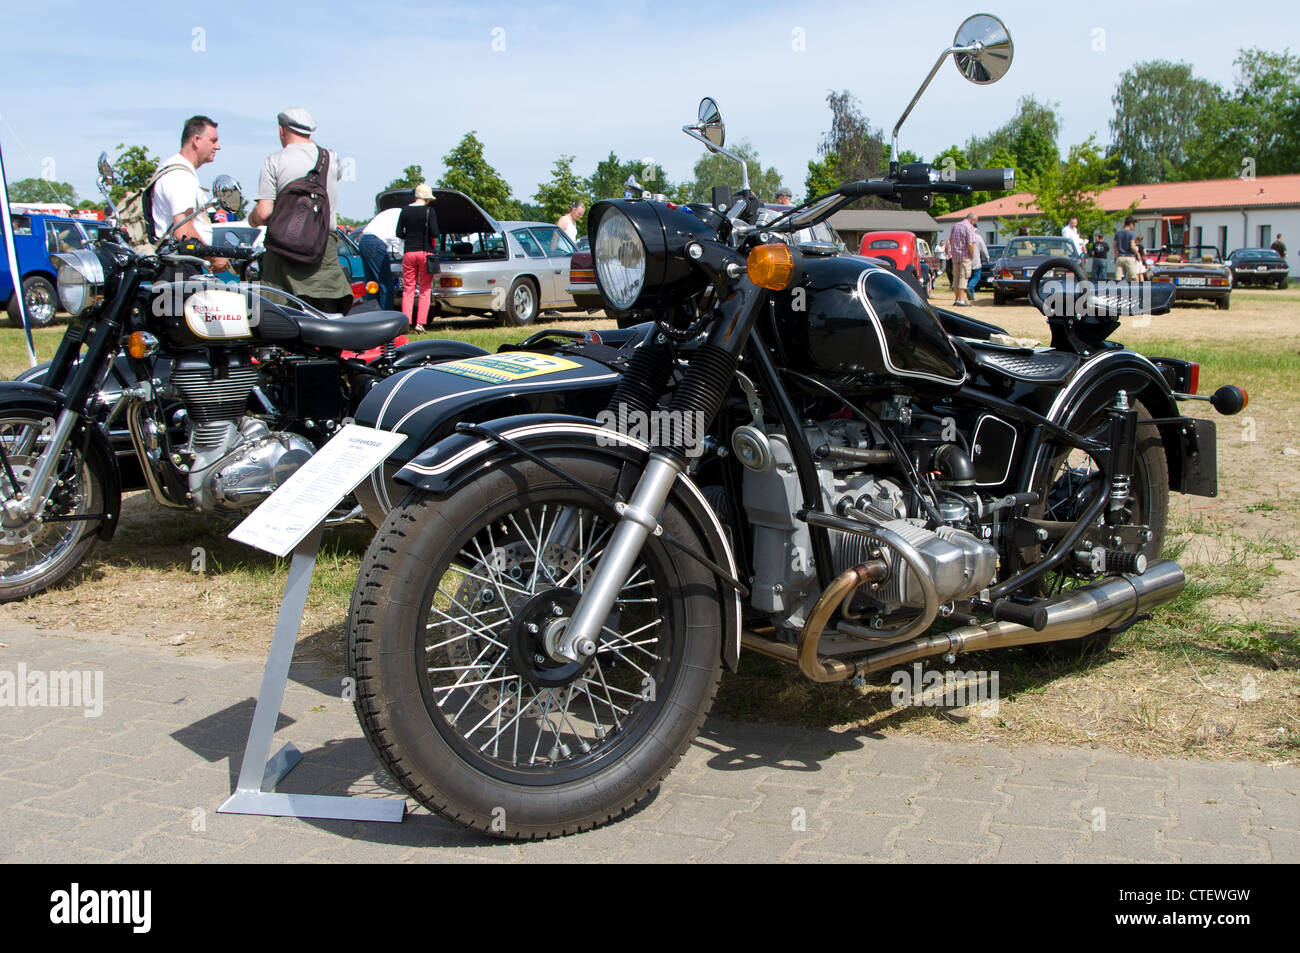 The motorcycle with sidecar Ural Retro Stock Photo